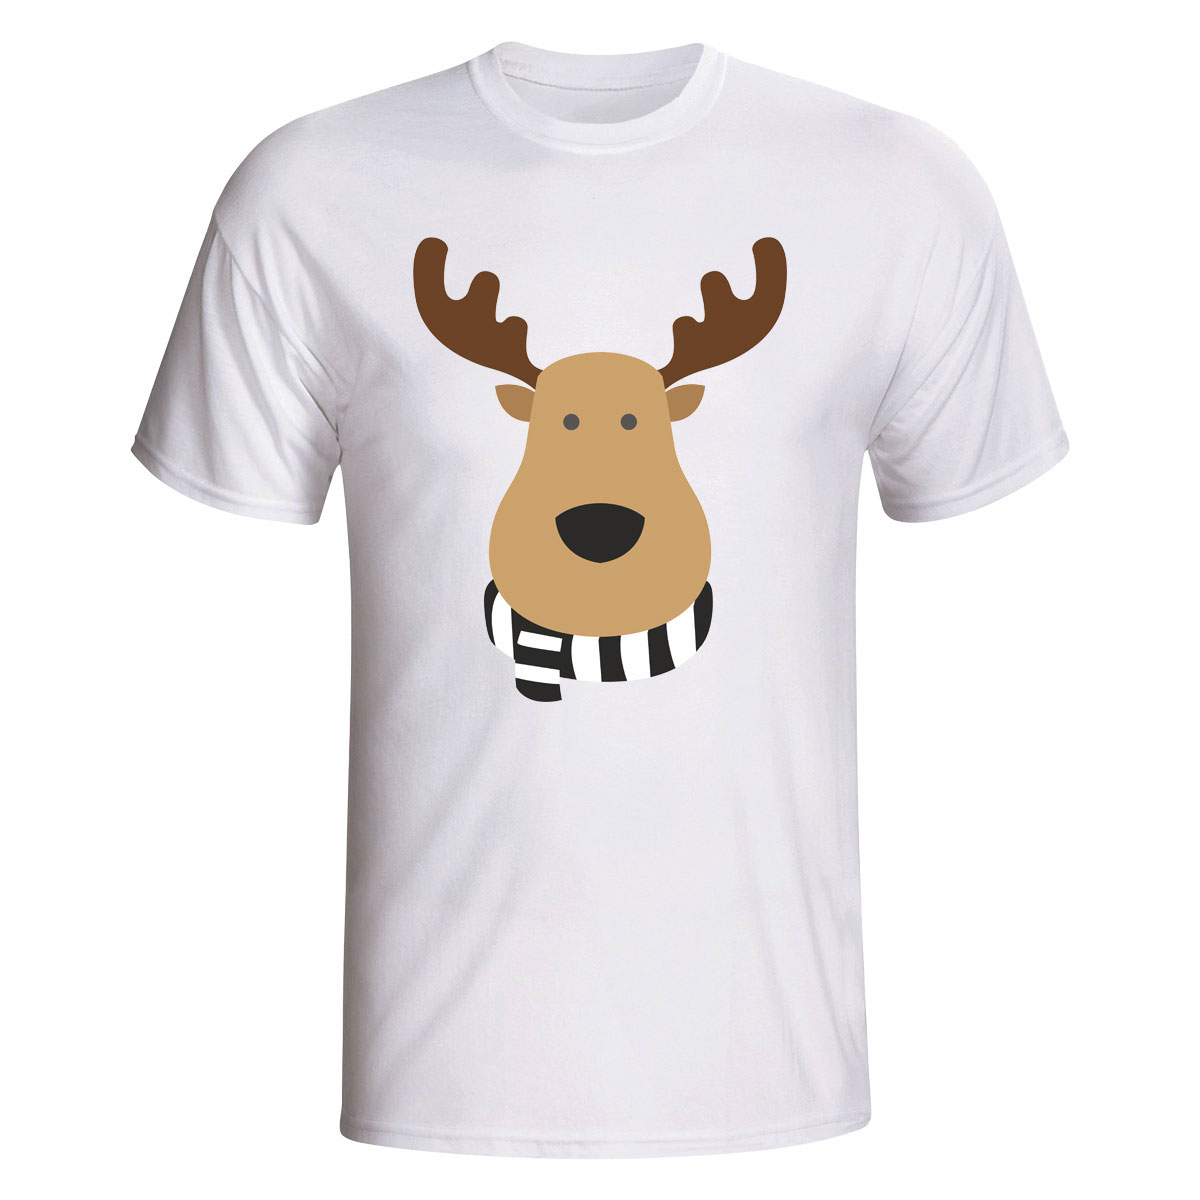 Valencia Rudolph Supporters T-shirt (white) - Kids